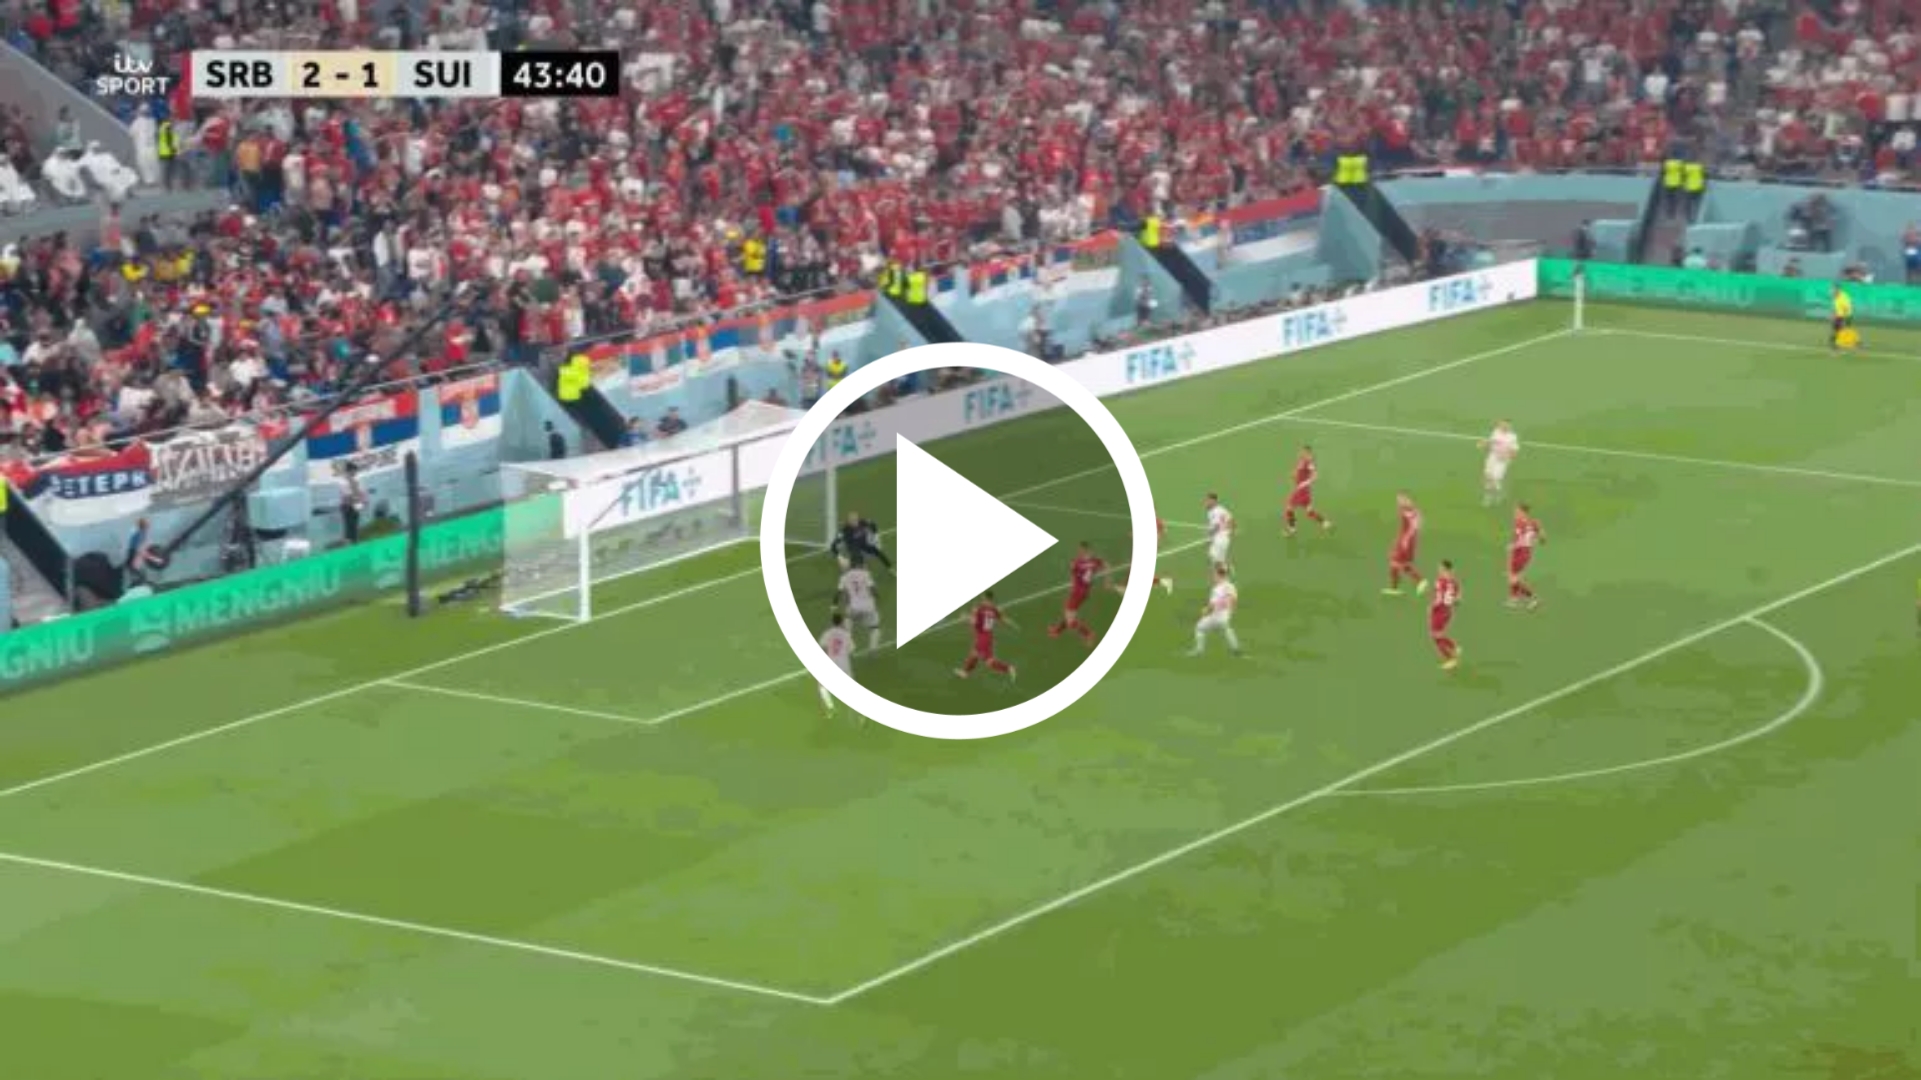 (Video): Watch Four first half goals as Switzerland and Serbia go head-to-head in crunch World Cup tie 1 Sportelo